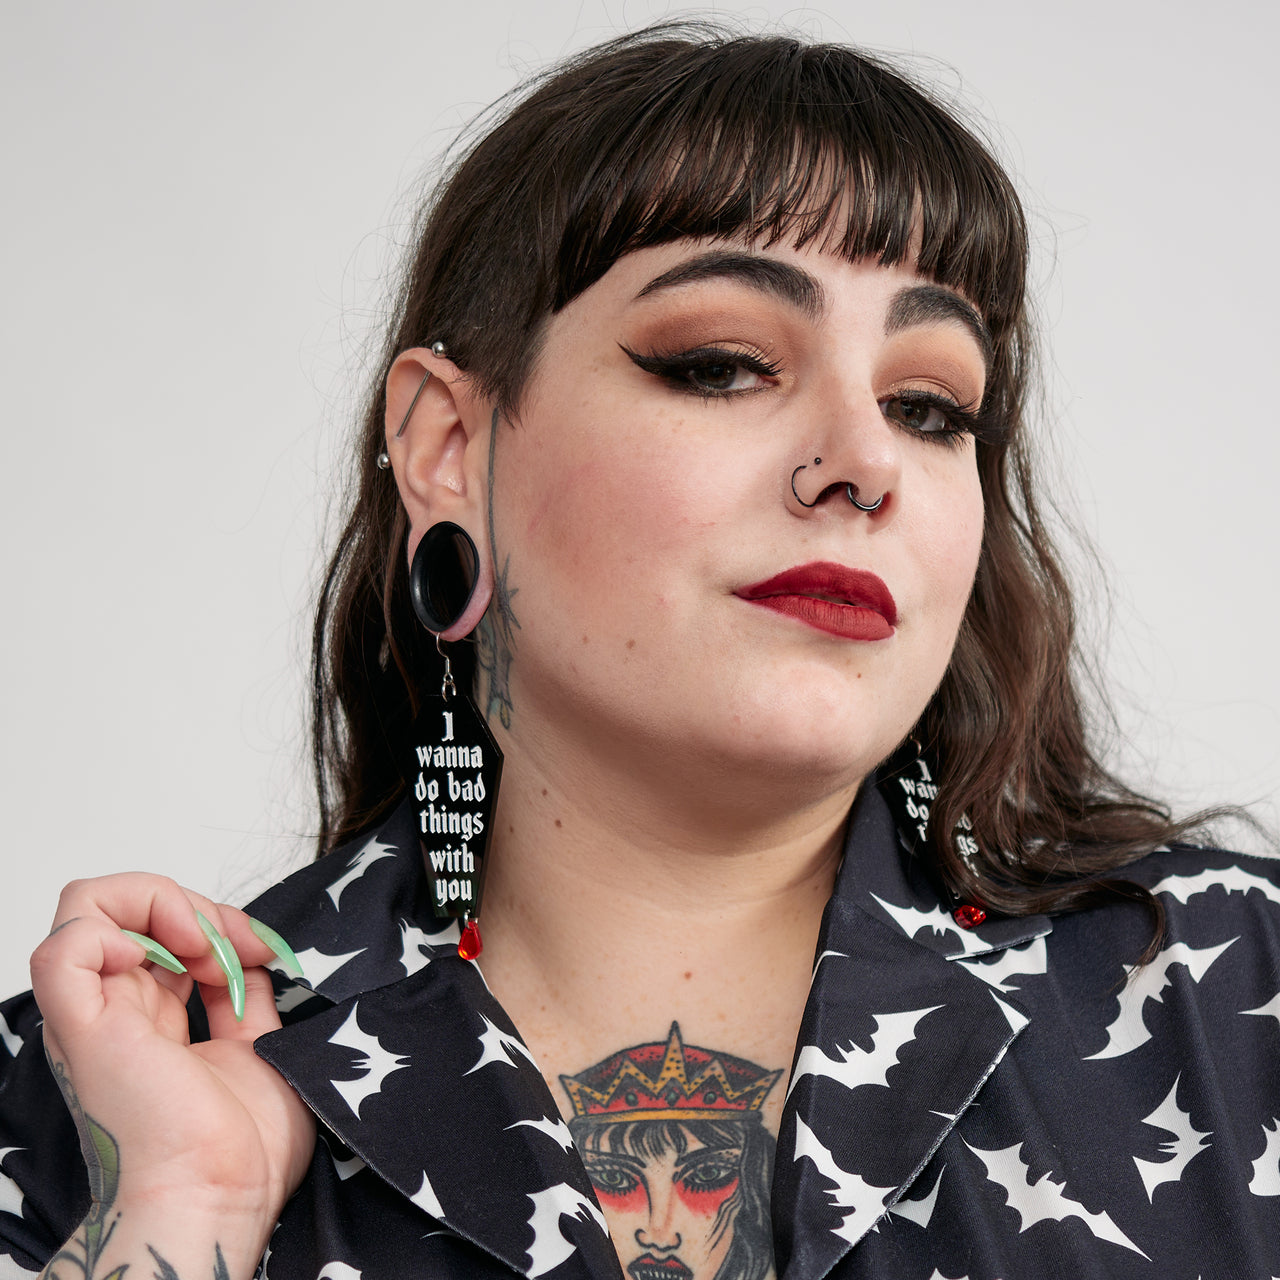 MALA BAD THINGS WITH YOU COFFIN EARRINGS